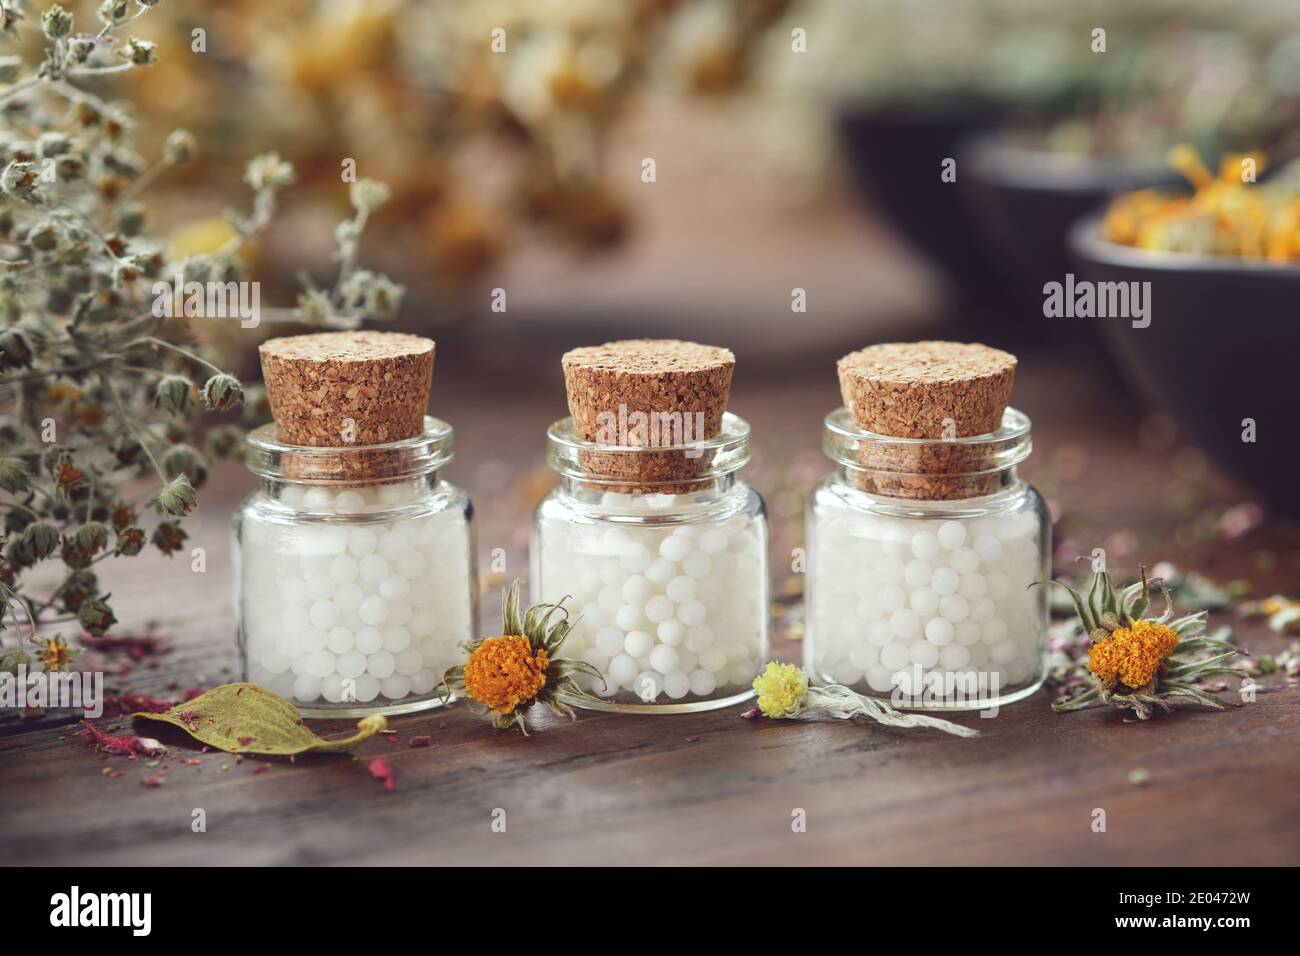 Bottles of homeopathic globules and medicinal herbs. Homeopathy medicine concept. Stock Photo